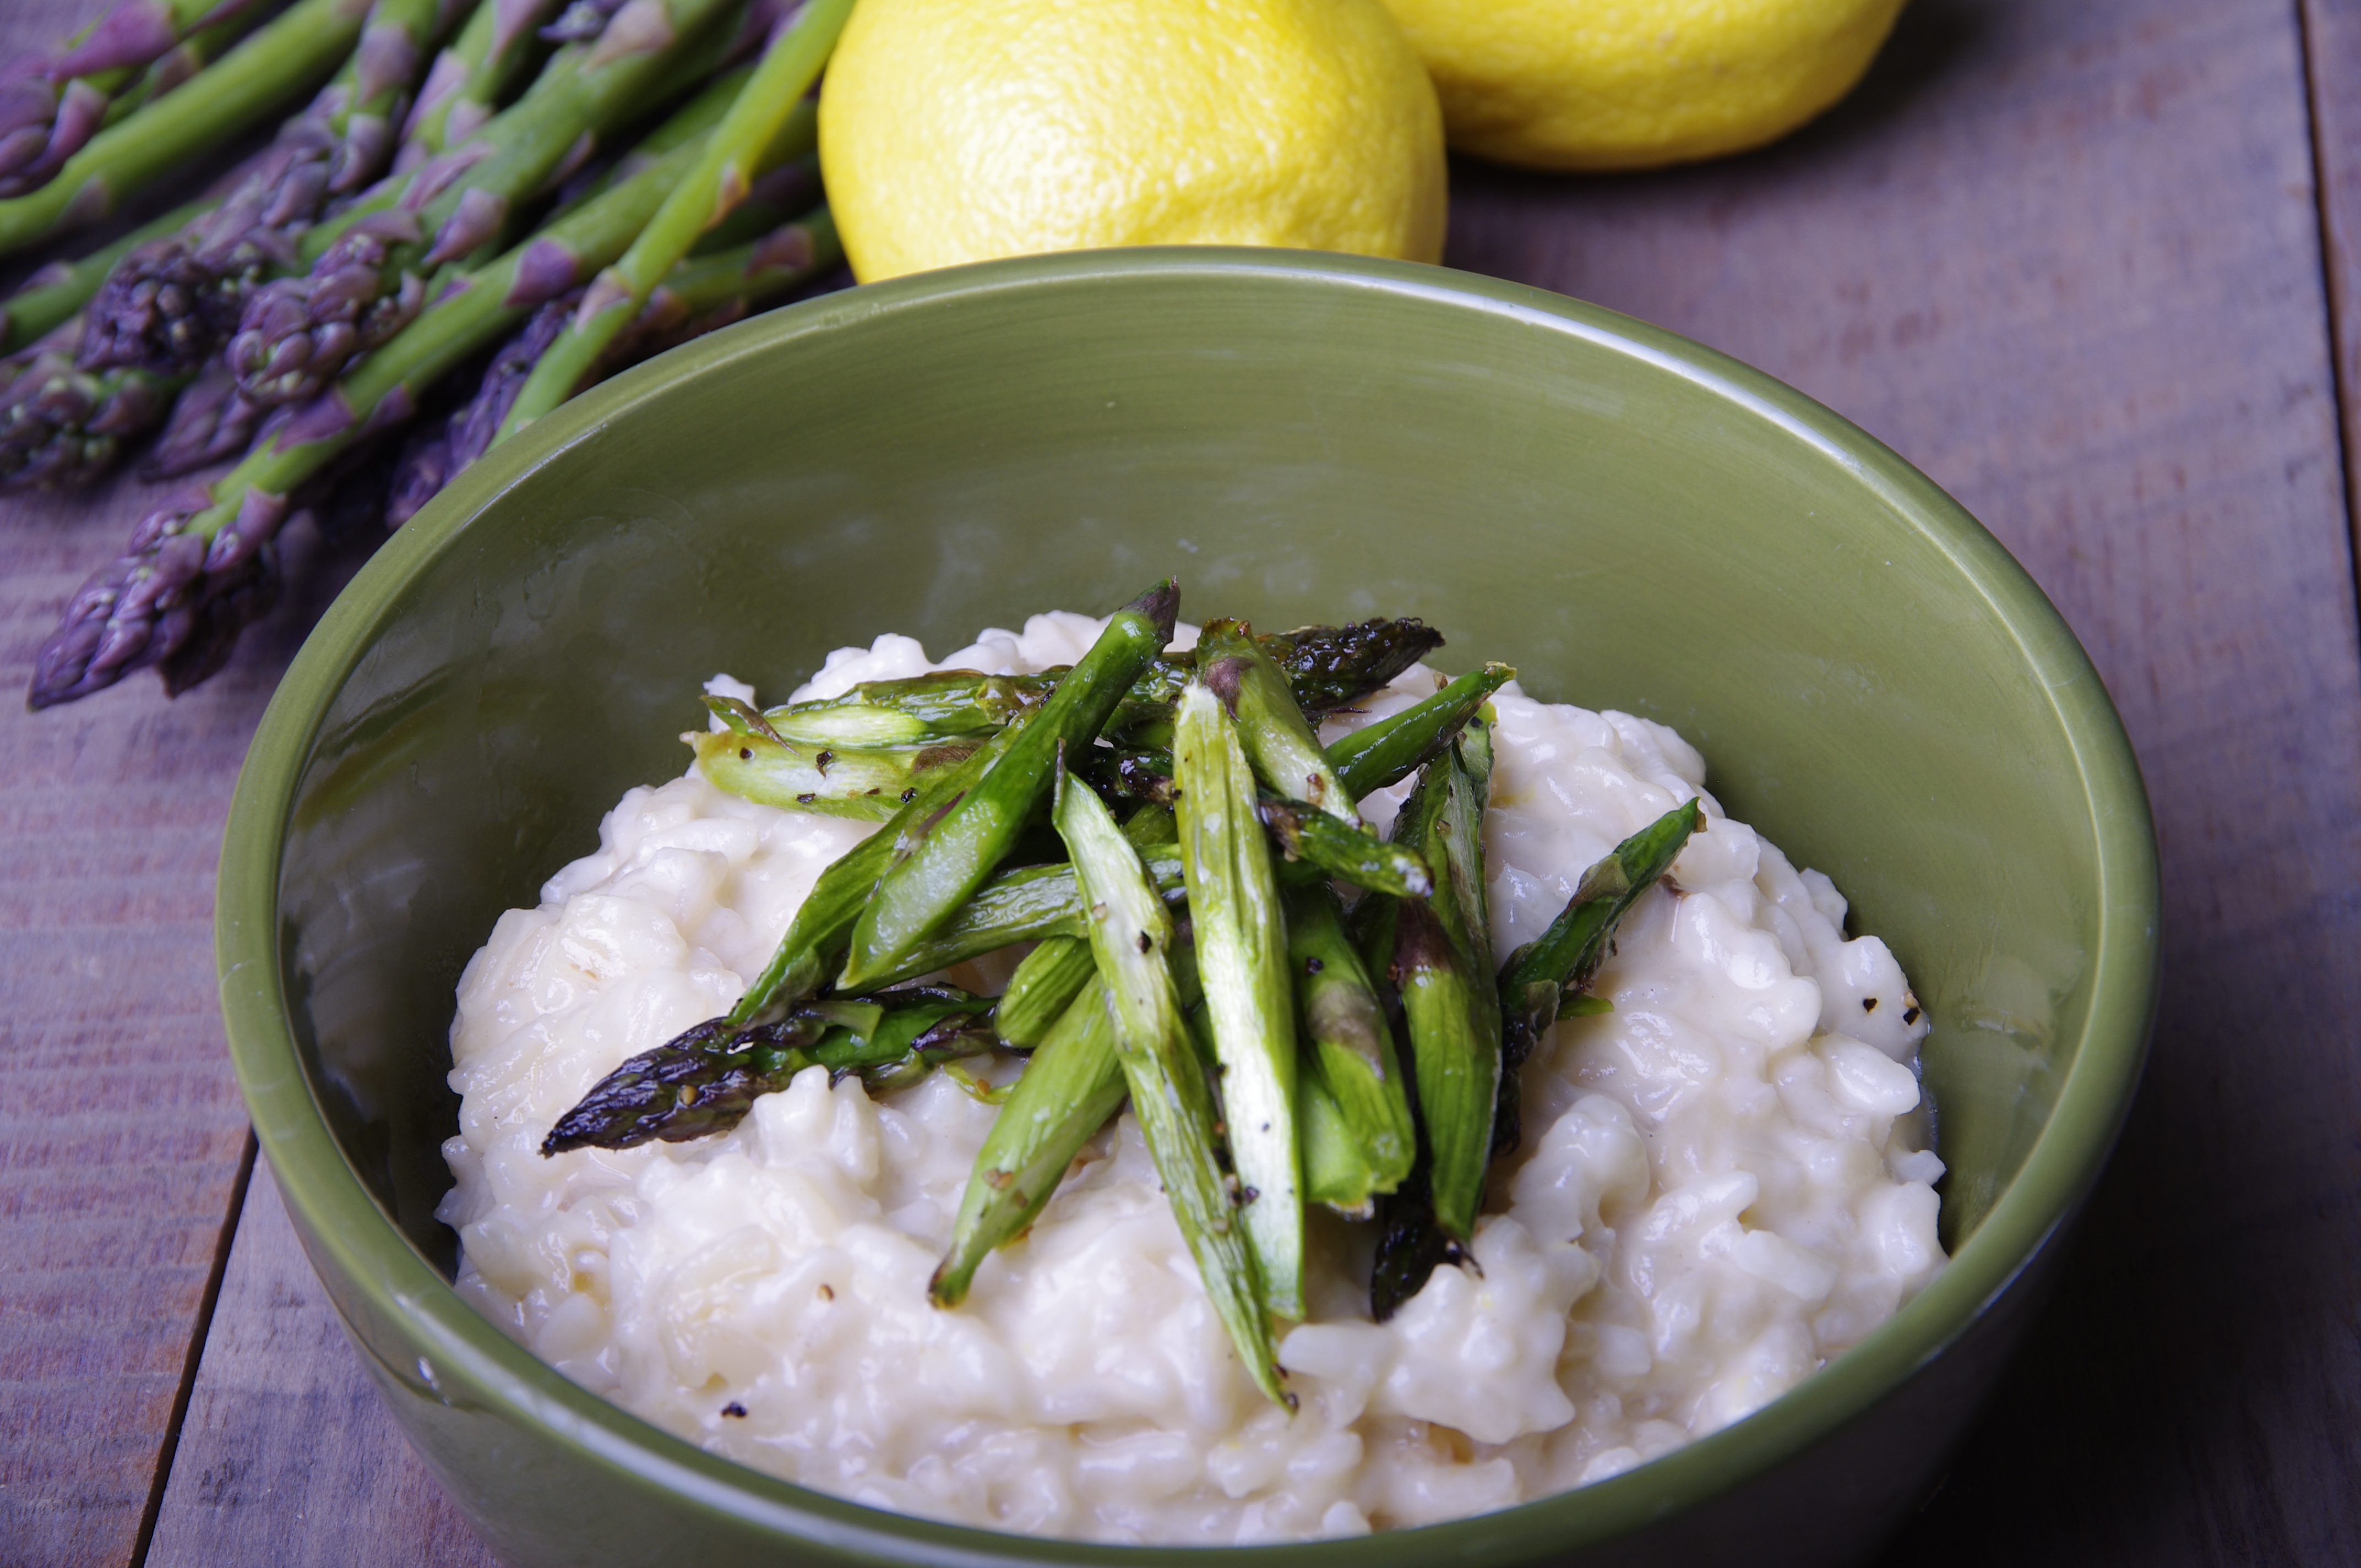 Lemon Risotto with Roasted Asparagus & Chicken